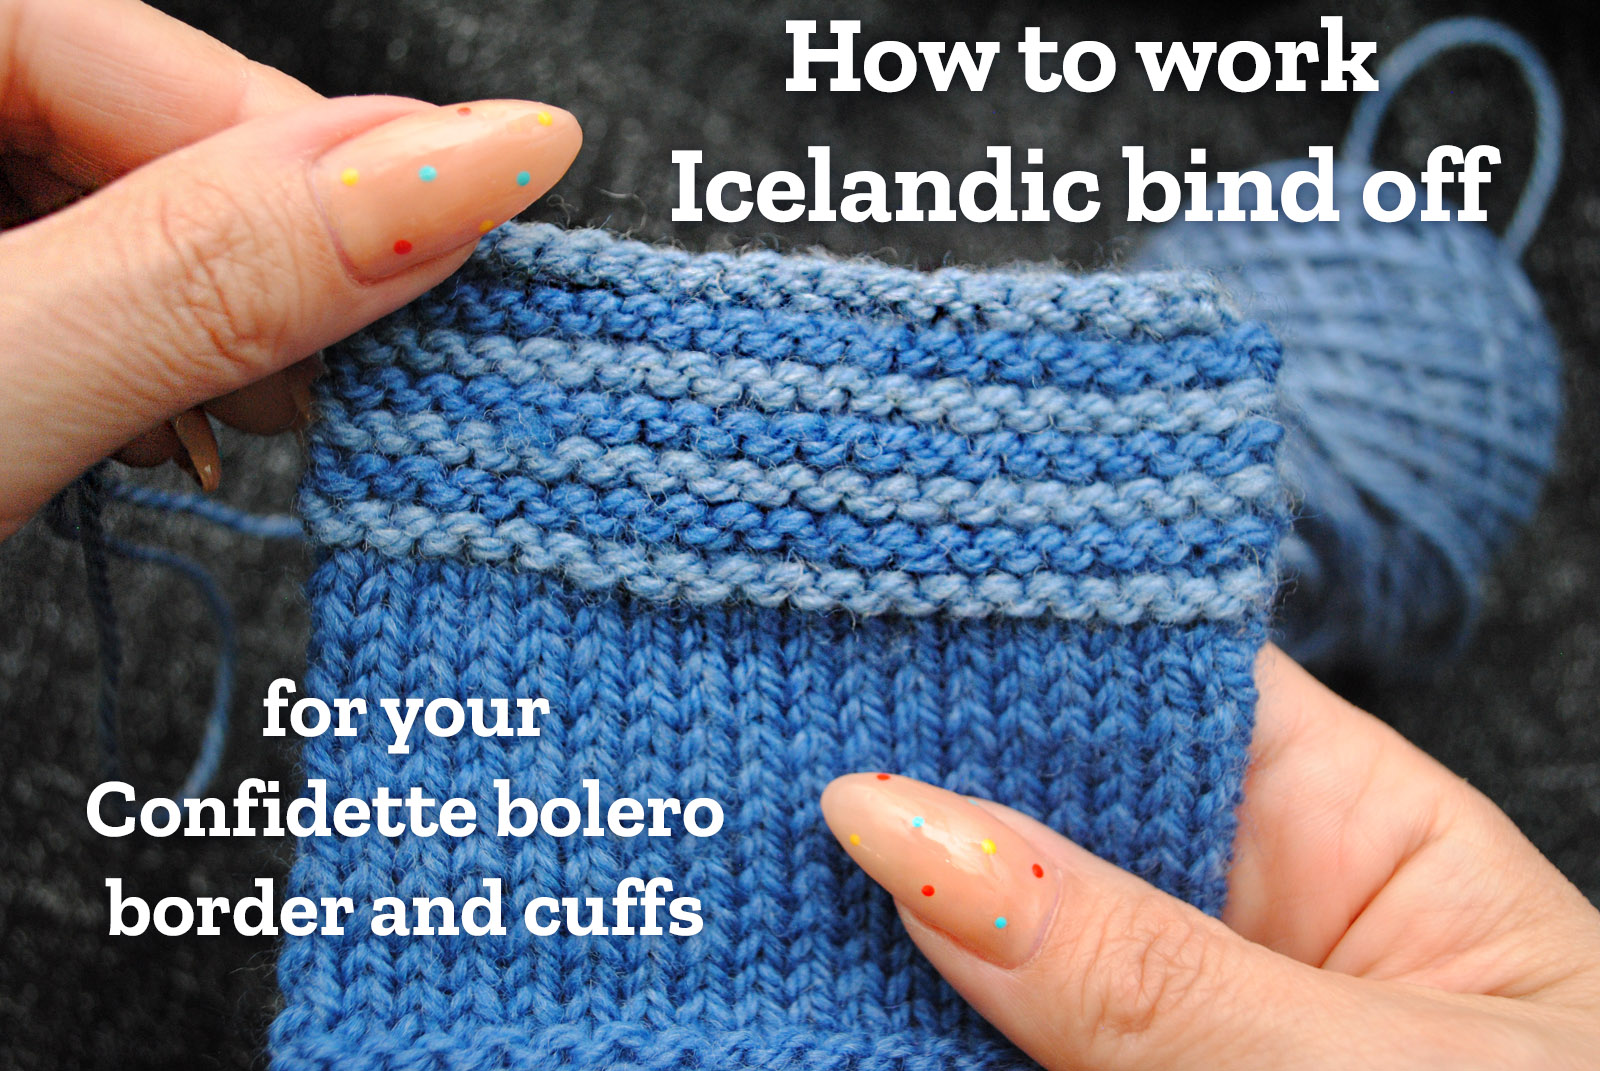 How to work Icelandic bind off for your Confidette bolero border and cuffs